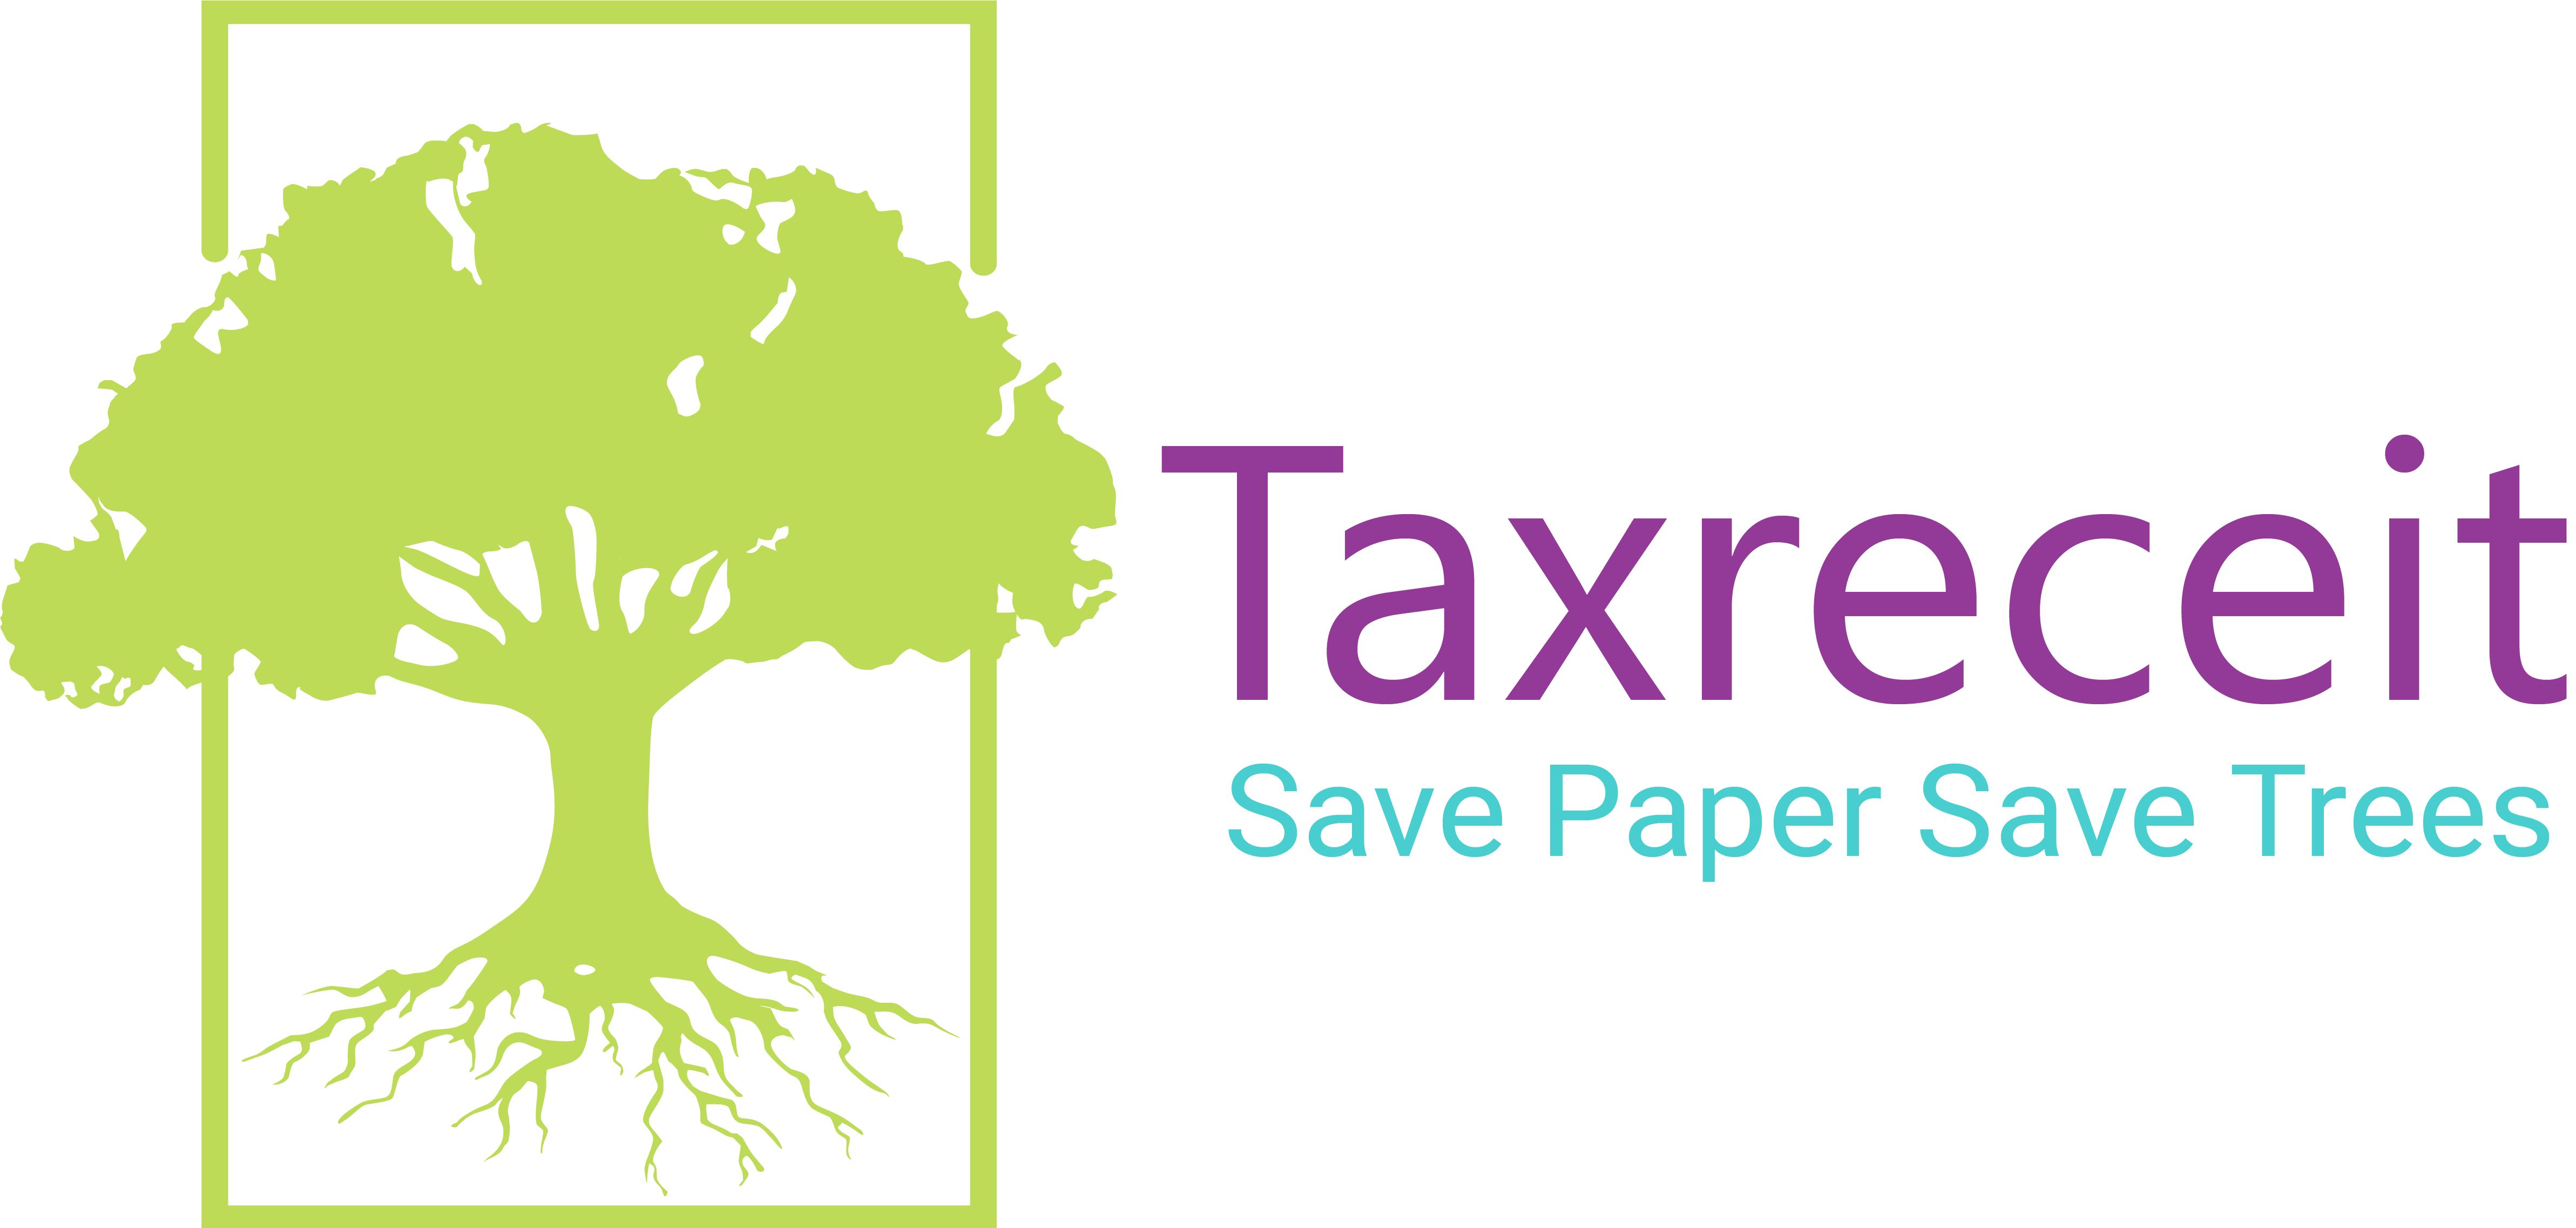 Save Paper, Save Trees added a... - Save Paper, Save Trees